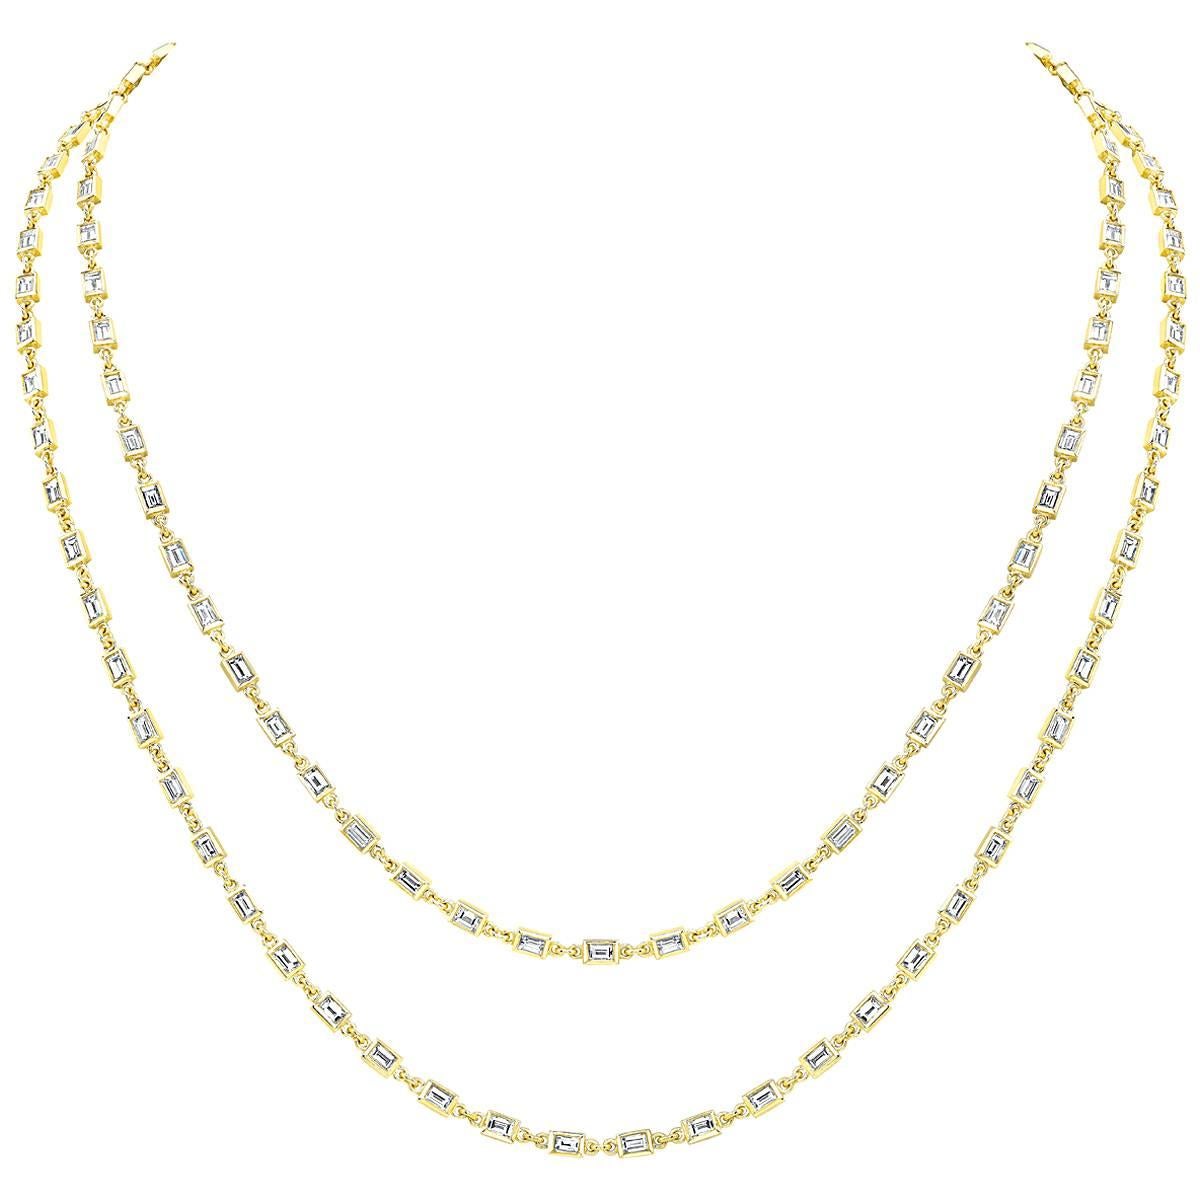 10.96 Carat TW Baguette Diamonds by The Yard Chain Necklace For Sale